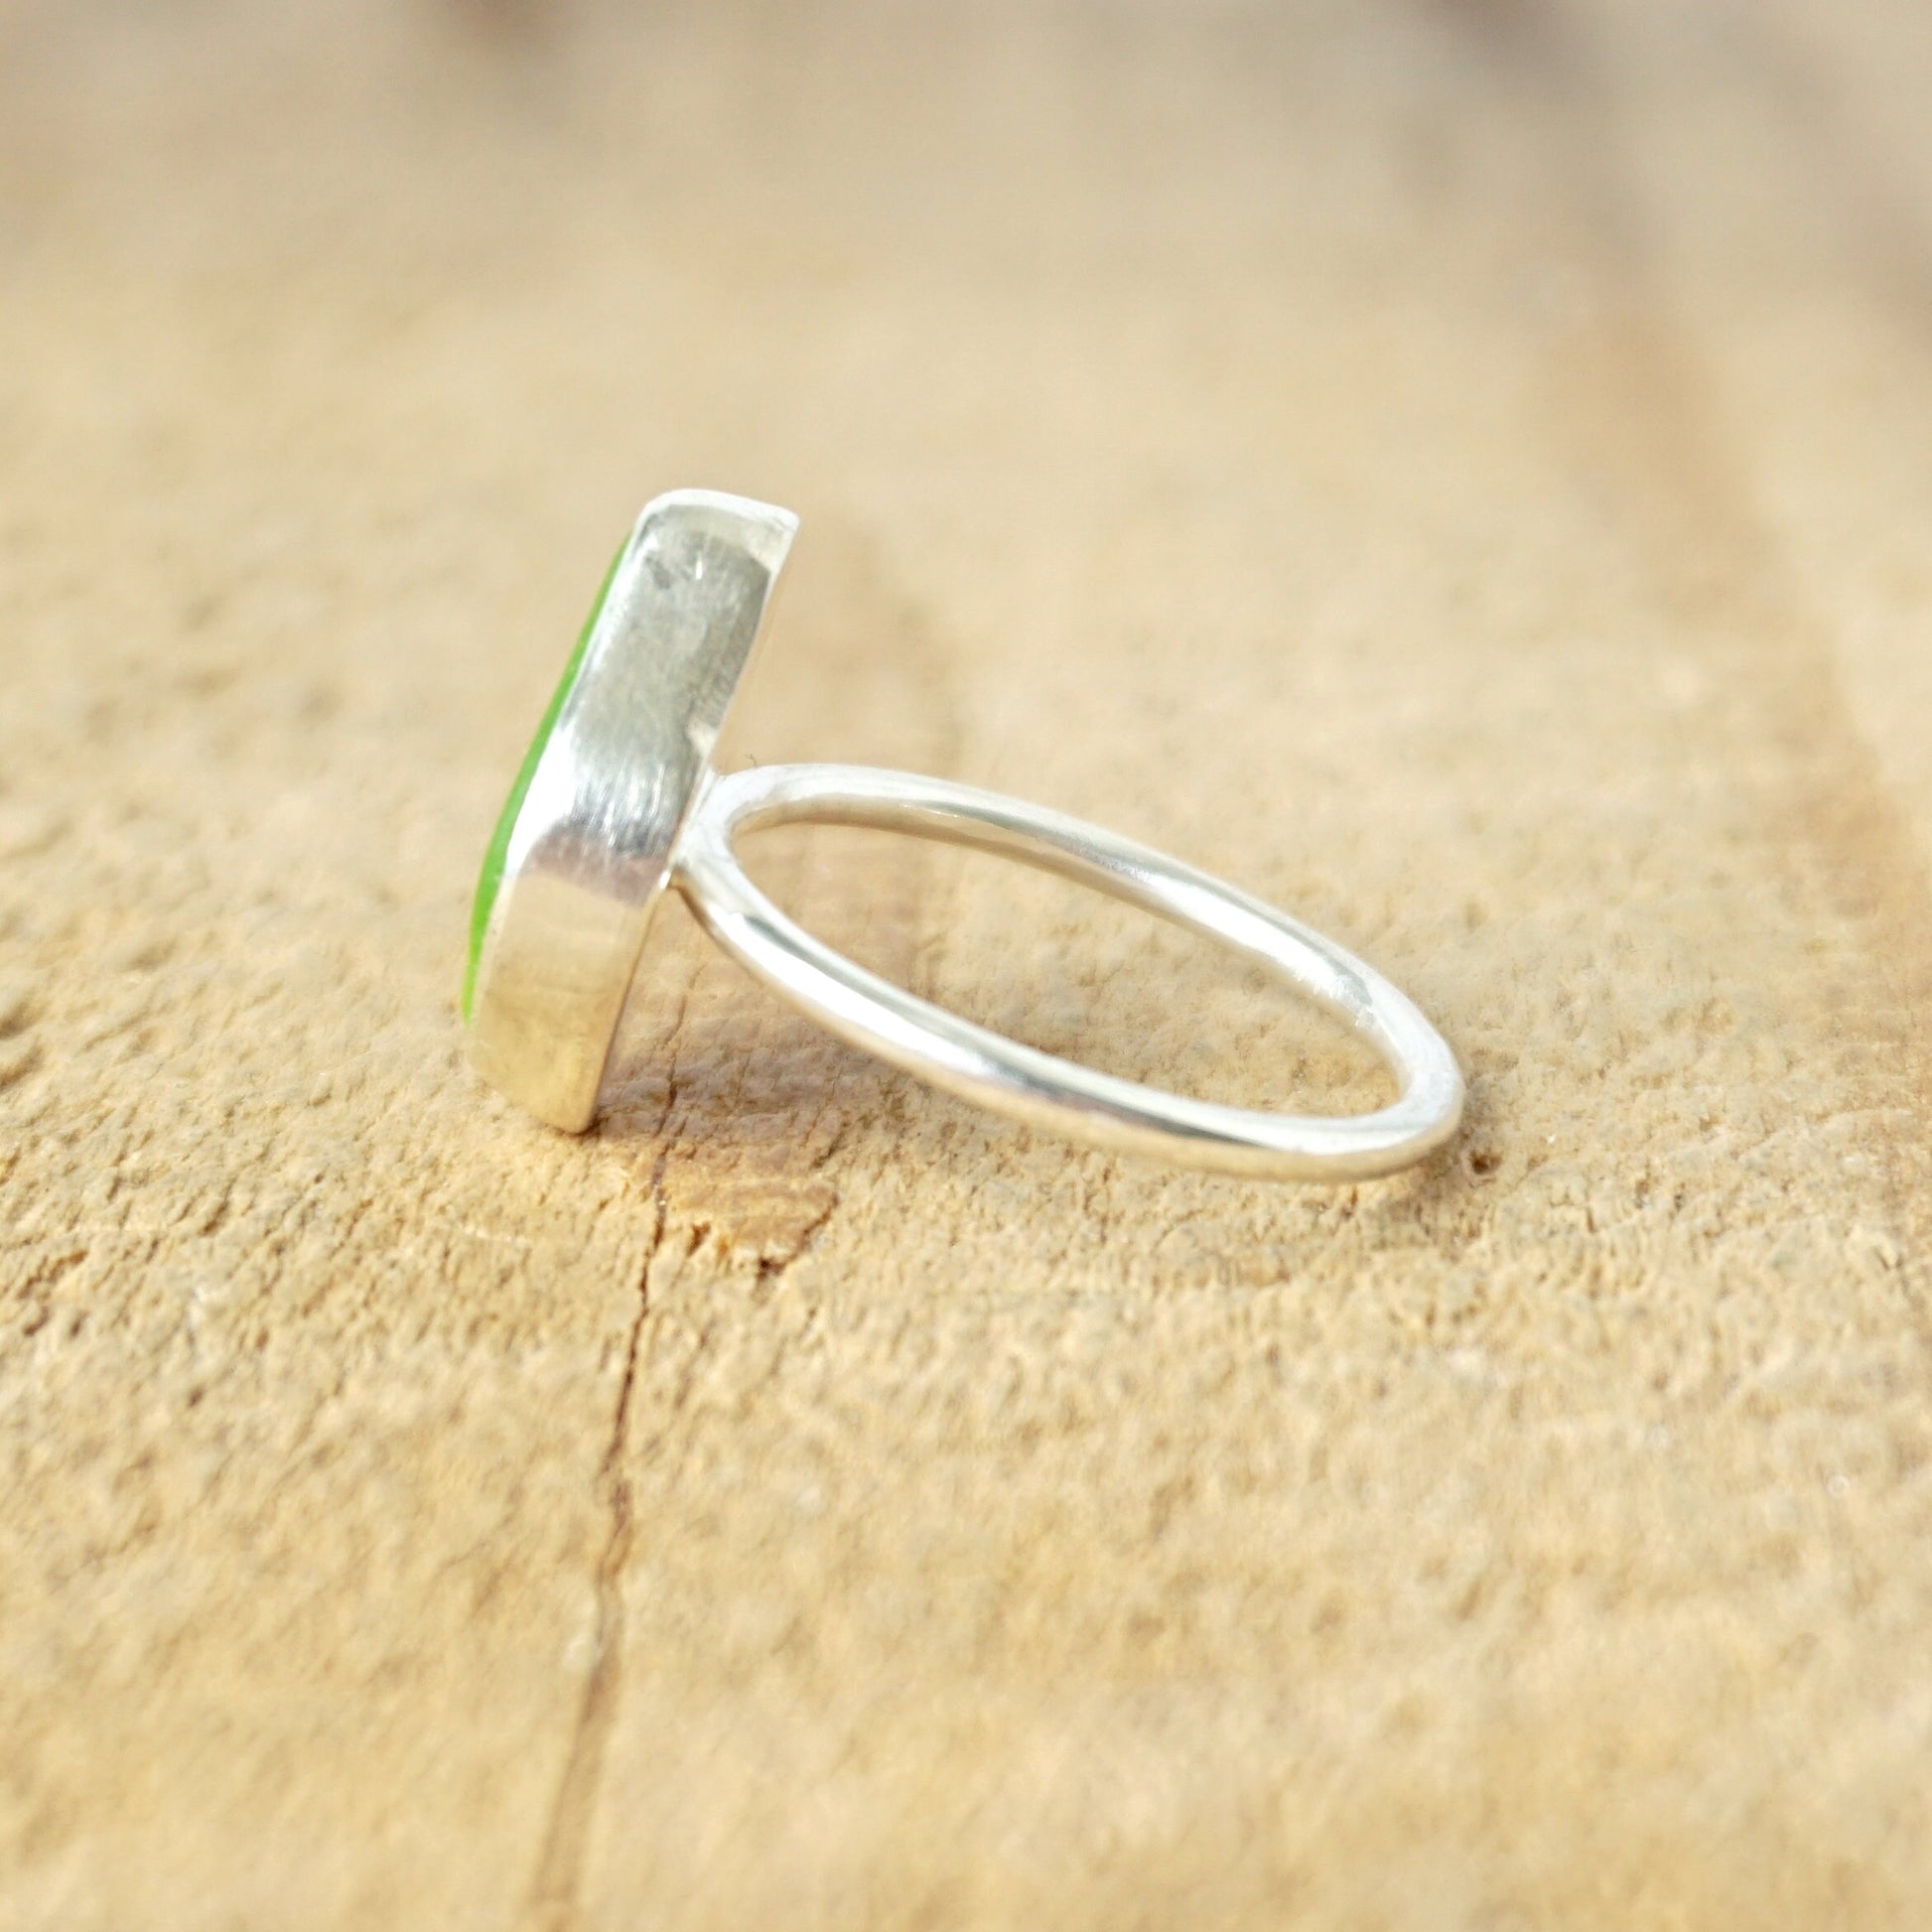 Size 7 1/2 Lime Green Sea Glass Stacking Ring - Genuine Sea Glass, Natural Sea Glass, Stacking Jewelry, Stacker Ring, Boho Jewelry